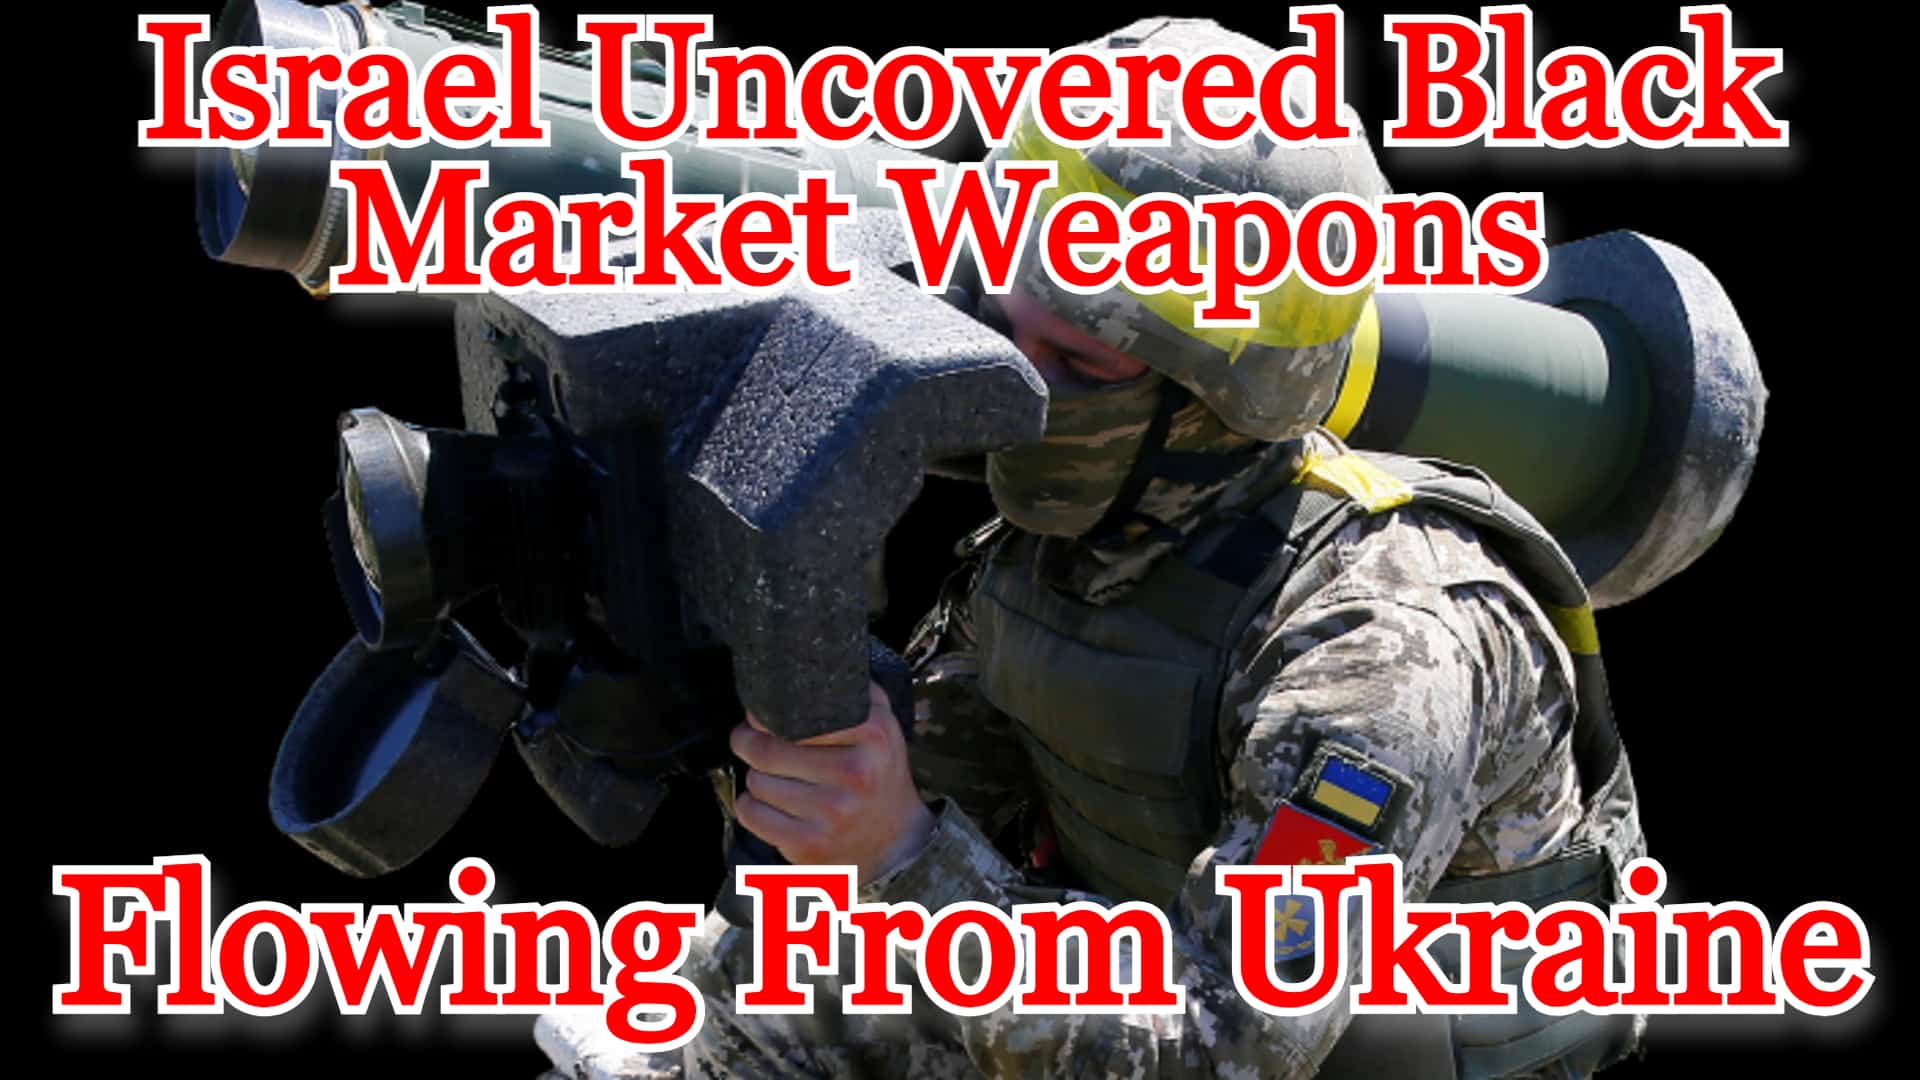 COI #436: Israel Uncovered Black Market Weapons Flowing From Ukraine